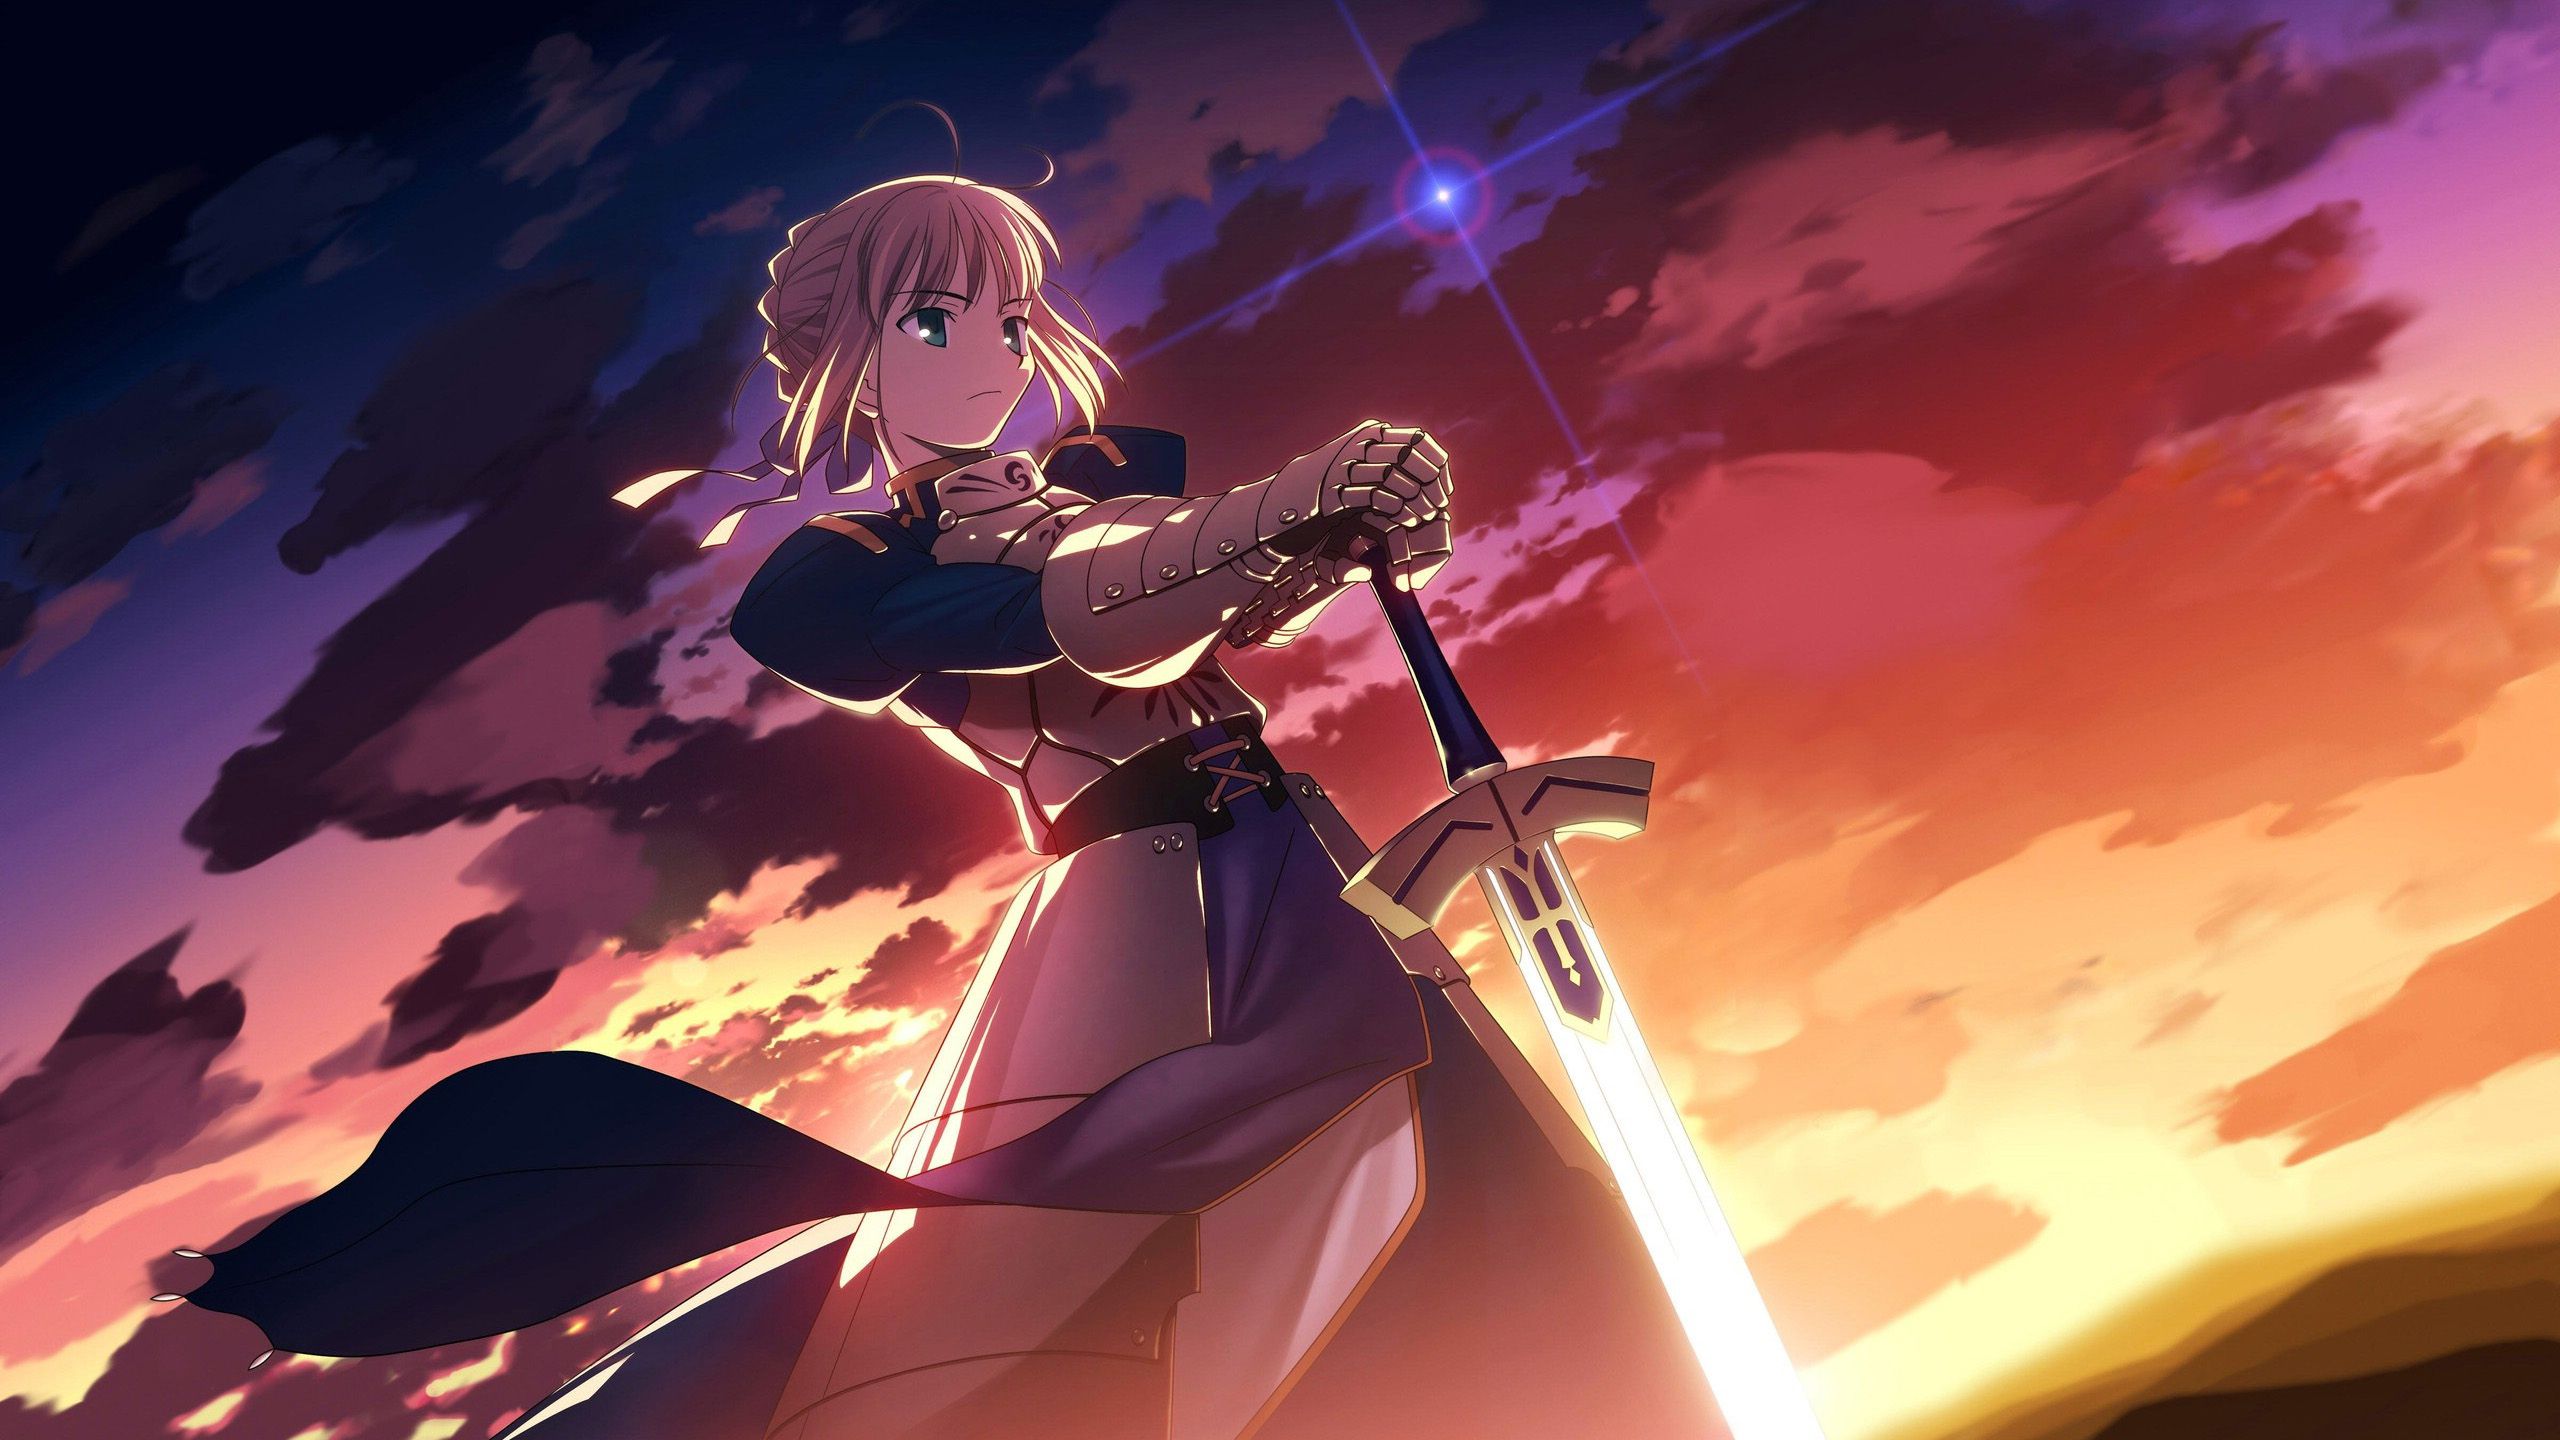 Saber Fate Stay Night Wallpapers Wallpaper Cave